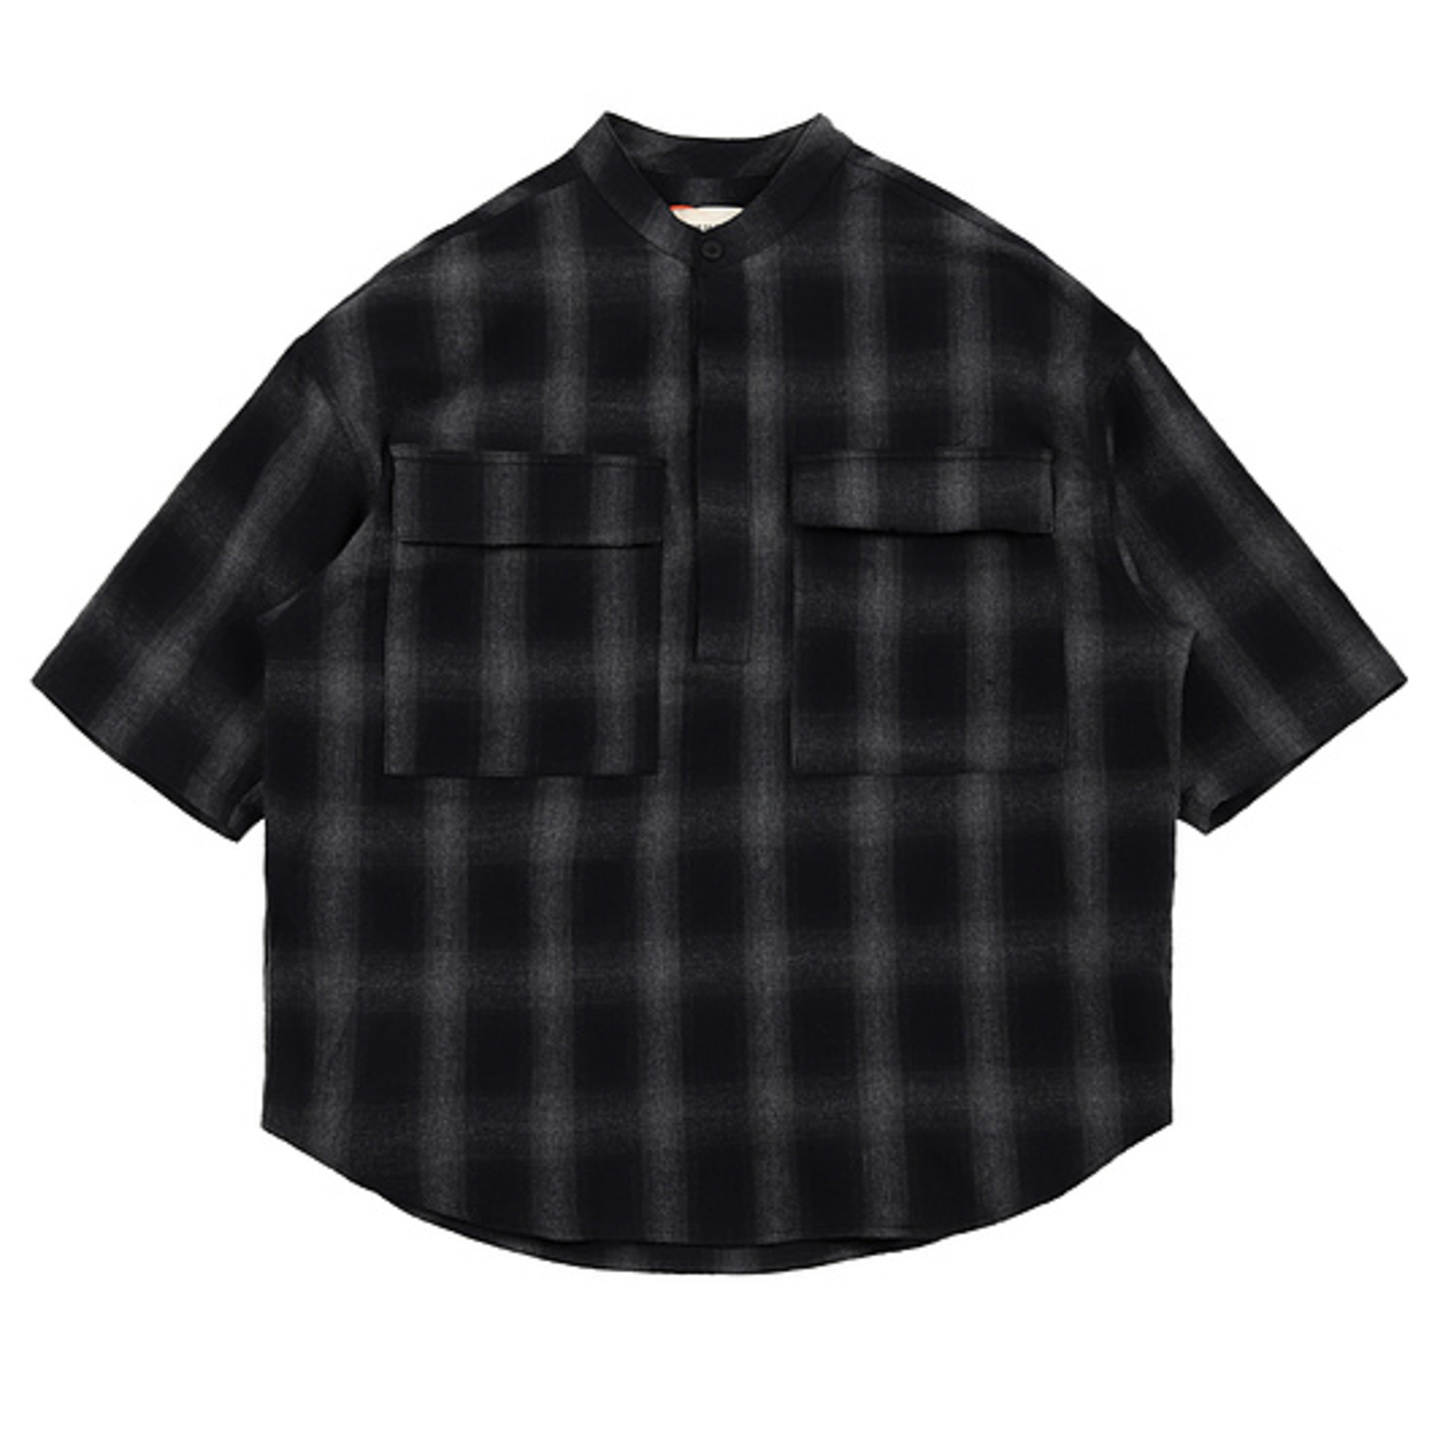 Fear of God 6th Collection Shirt